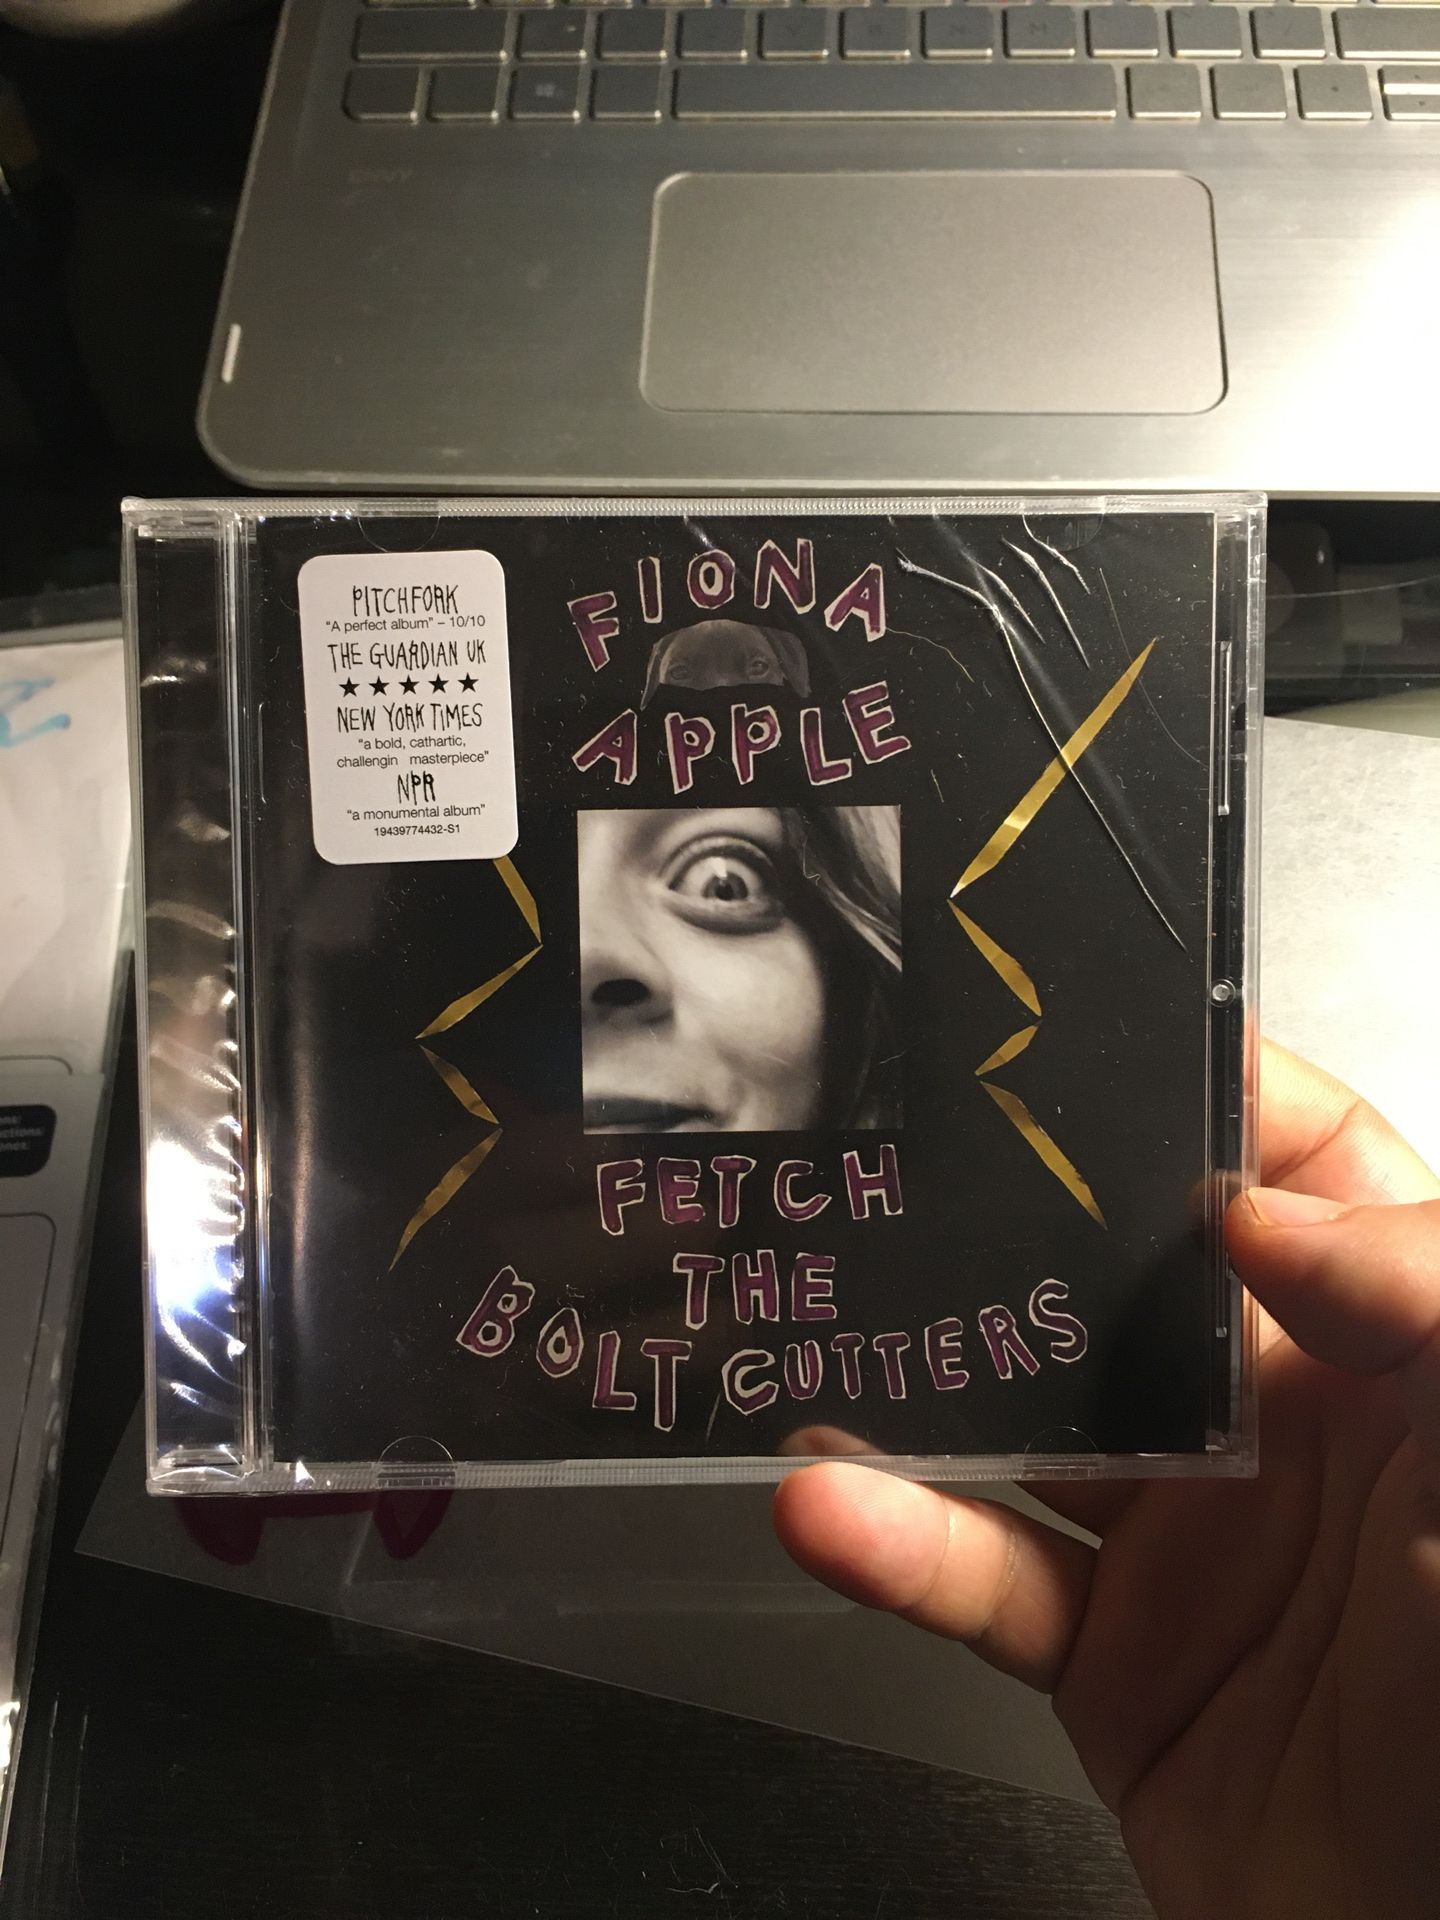 Fiona Apple - Fetch the Bolt Cutters CD - unopened